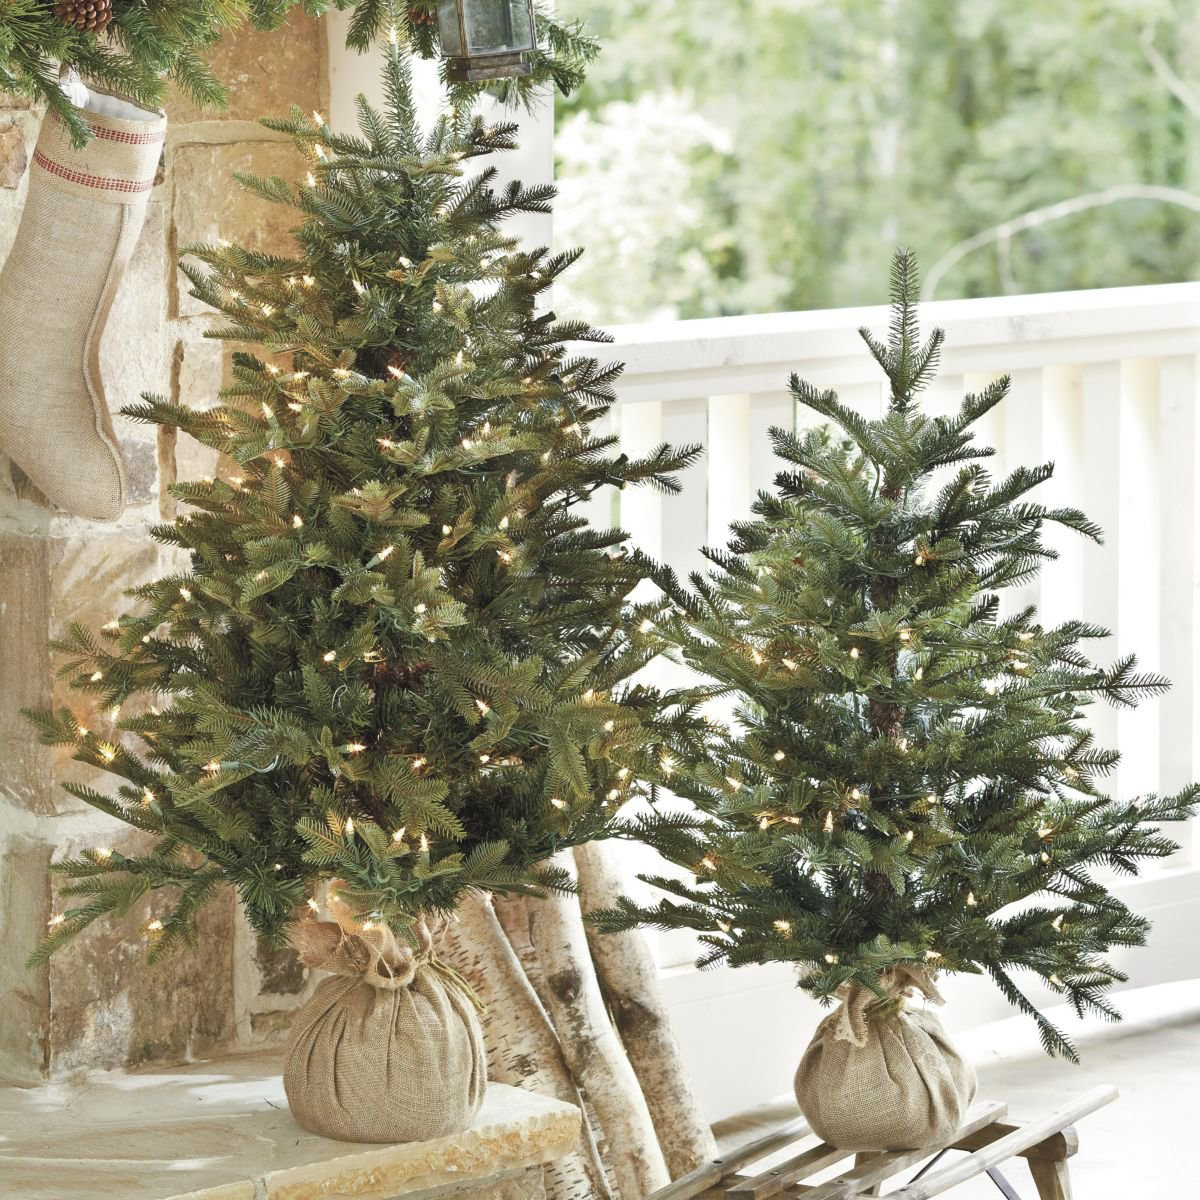 Table Top Christmas Trees
 Get the Joyful Christmas Nuance in Your Home by Decorating